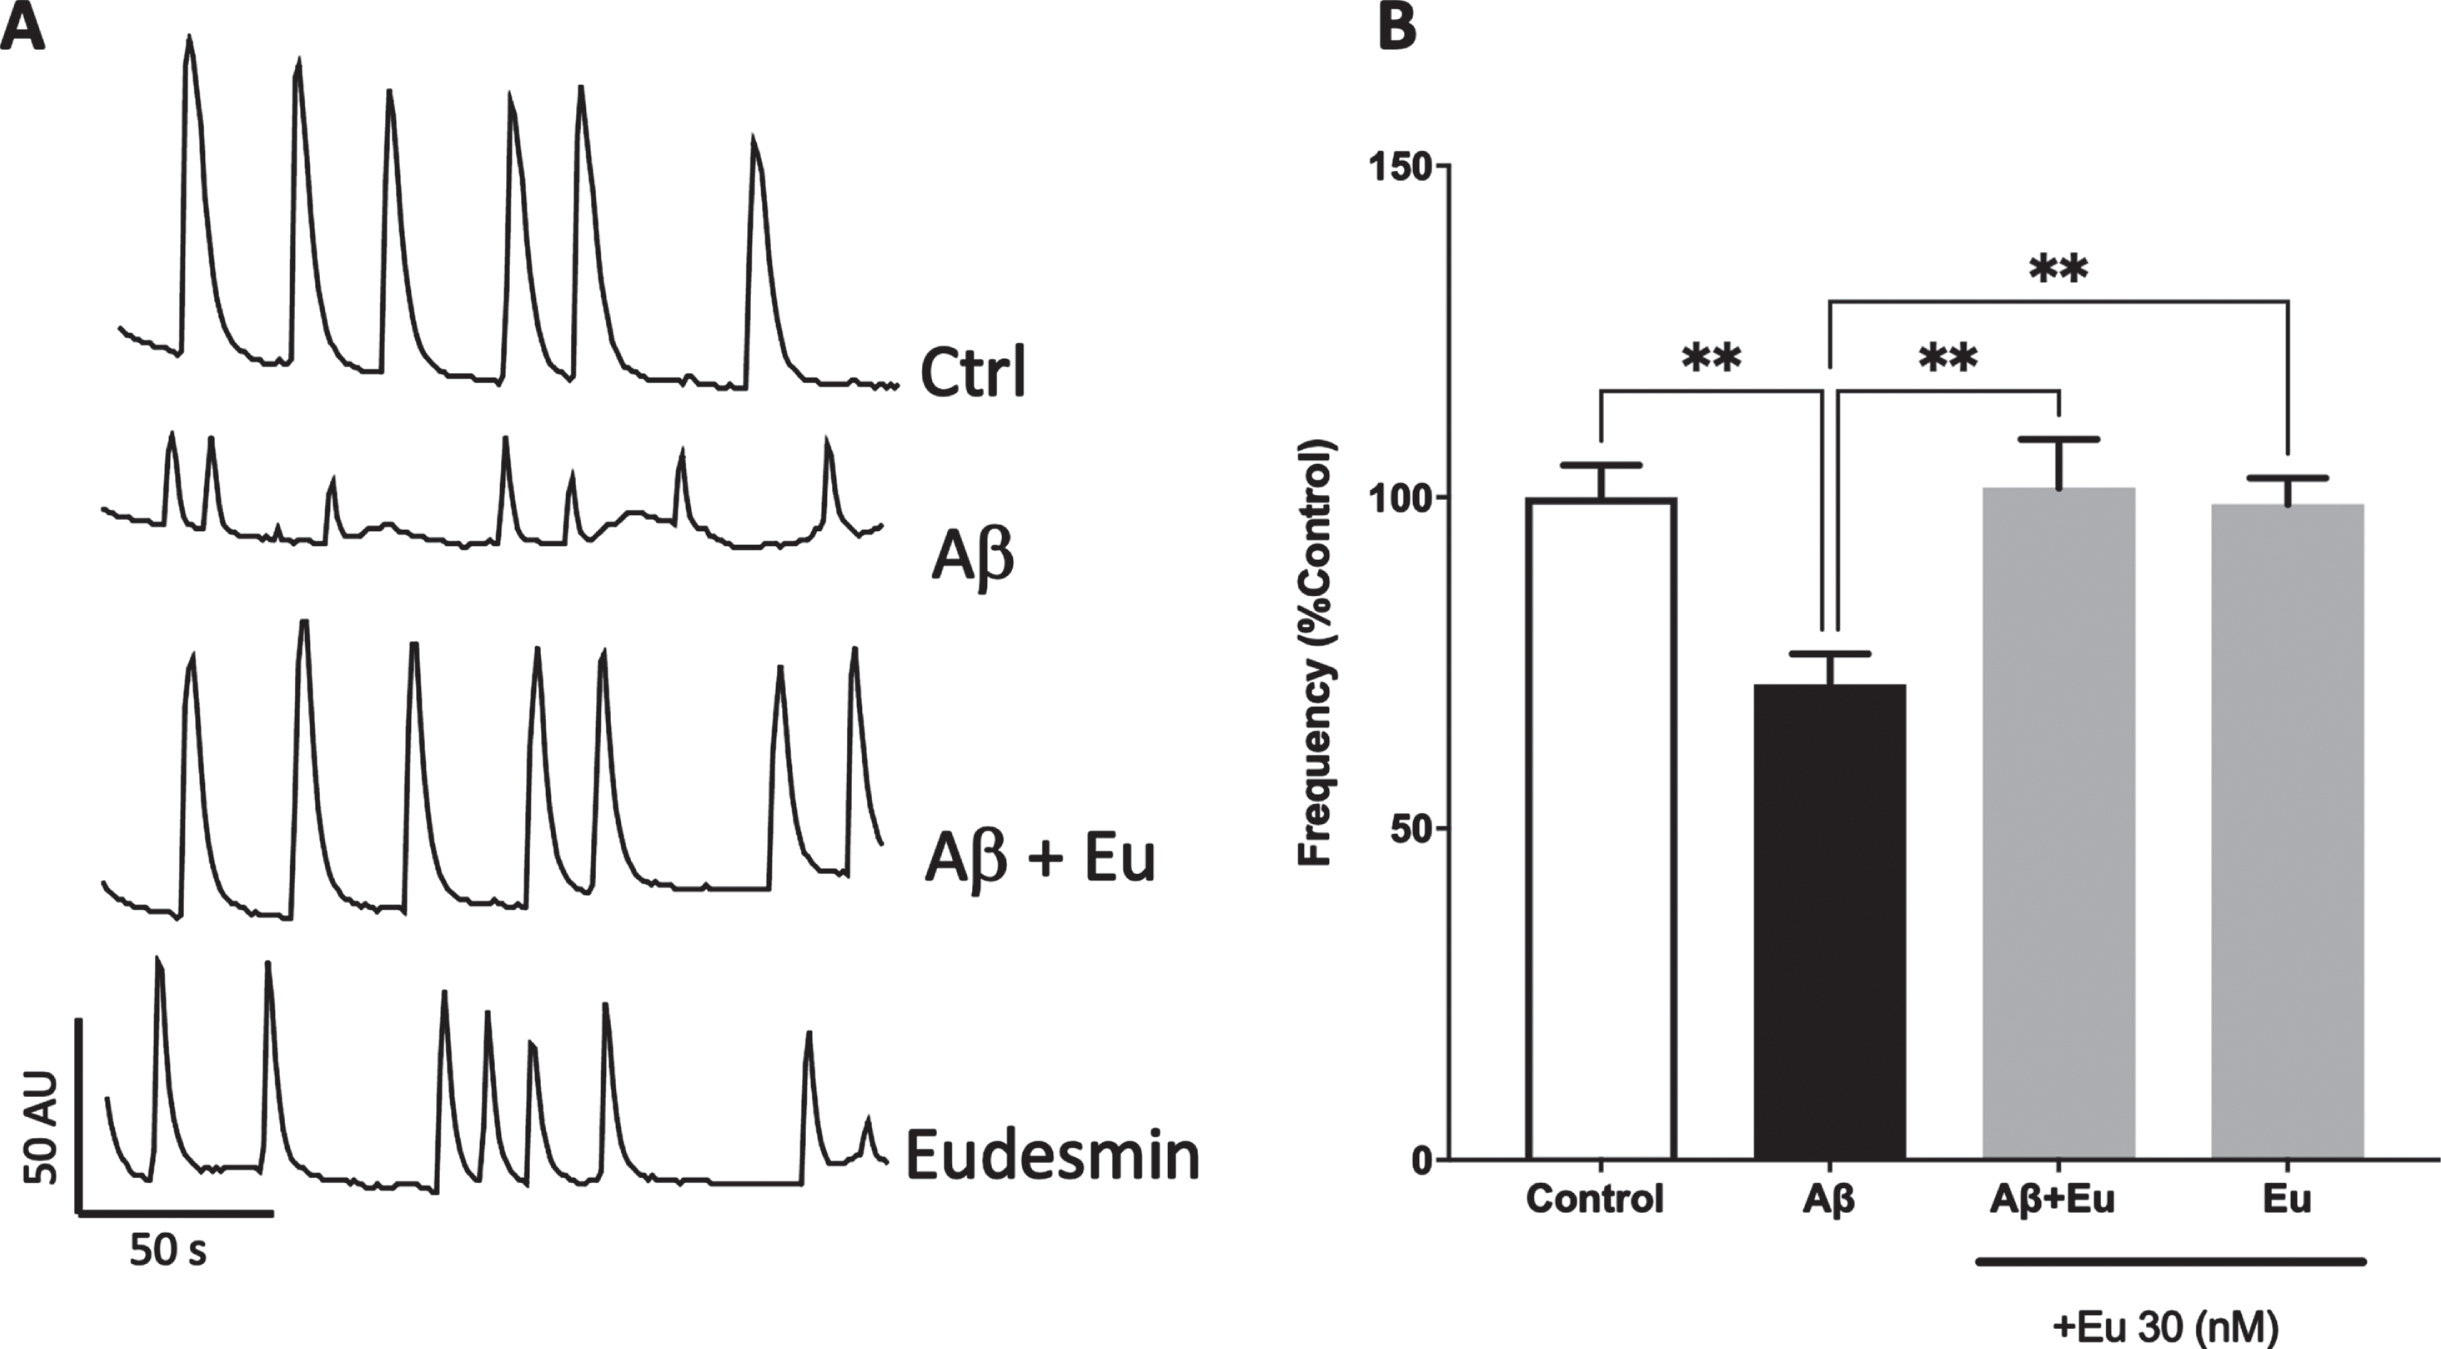 Eudesmin restored calcium transients in neurons treated with AβOs. Hippocampal neurons were co-incubated for 24 h with AβOs (0.5μM) and Eudesmin (30 nM). Calcium transients were measured using Fluo-4AM for 200 s. Representative images of calcium transients in cells treated to the different indicated treatments (A). Quantification of calcium transient’s frequency. Percentage values are expressed as the percentage of the control group (without AβOs treatment) (B). Values are mean±SEM, n = 3 using Kruskall-Wallis test, with Dunn’s post-test correction. **p < 0.01.